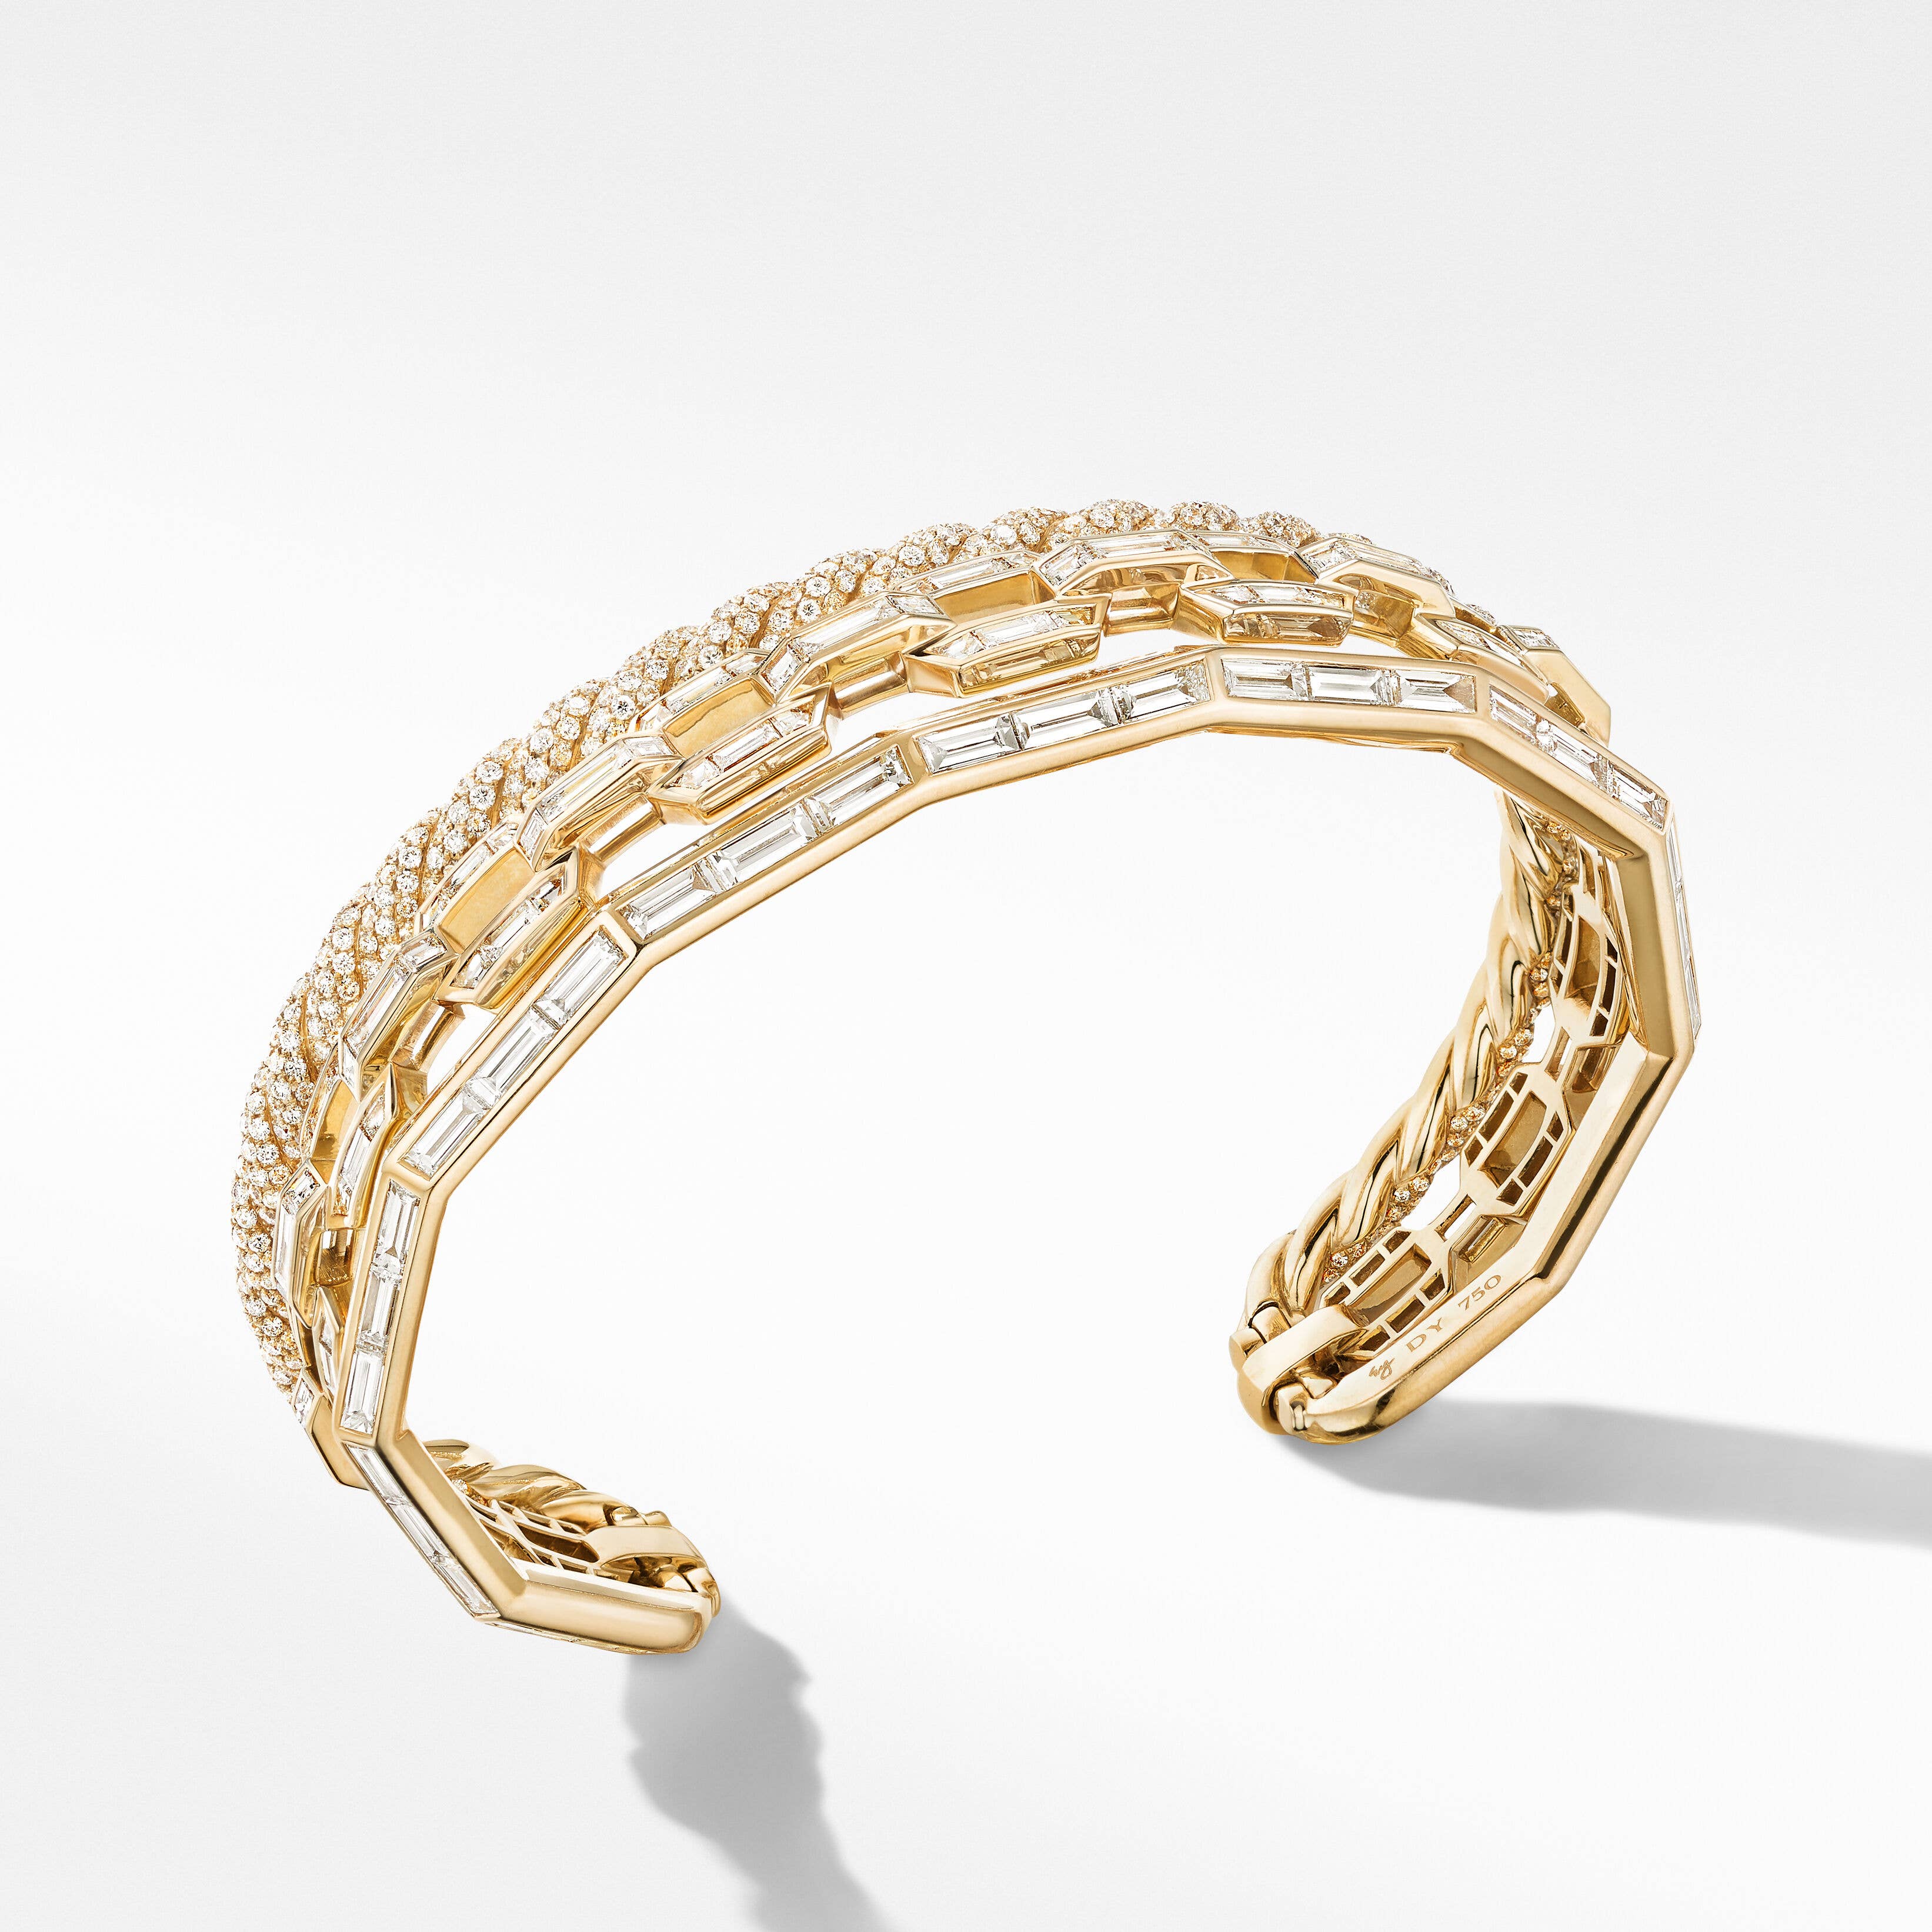 Stax Cuff Bracelet in Yellow Gold with Diamonds